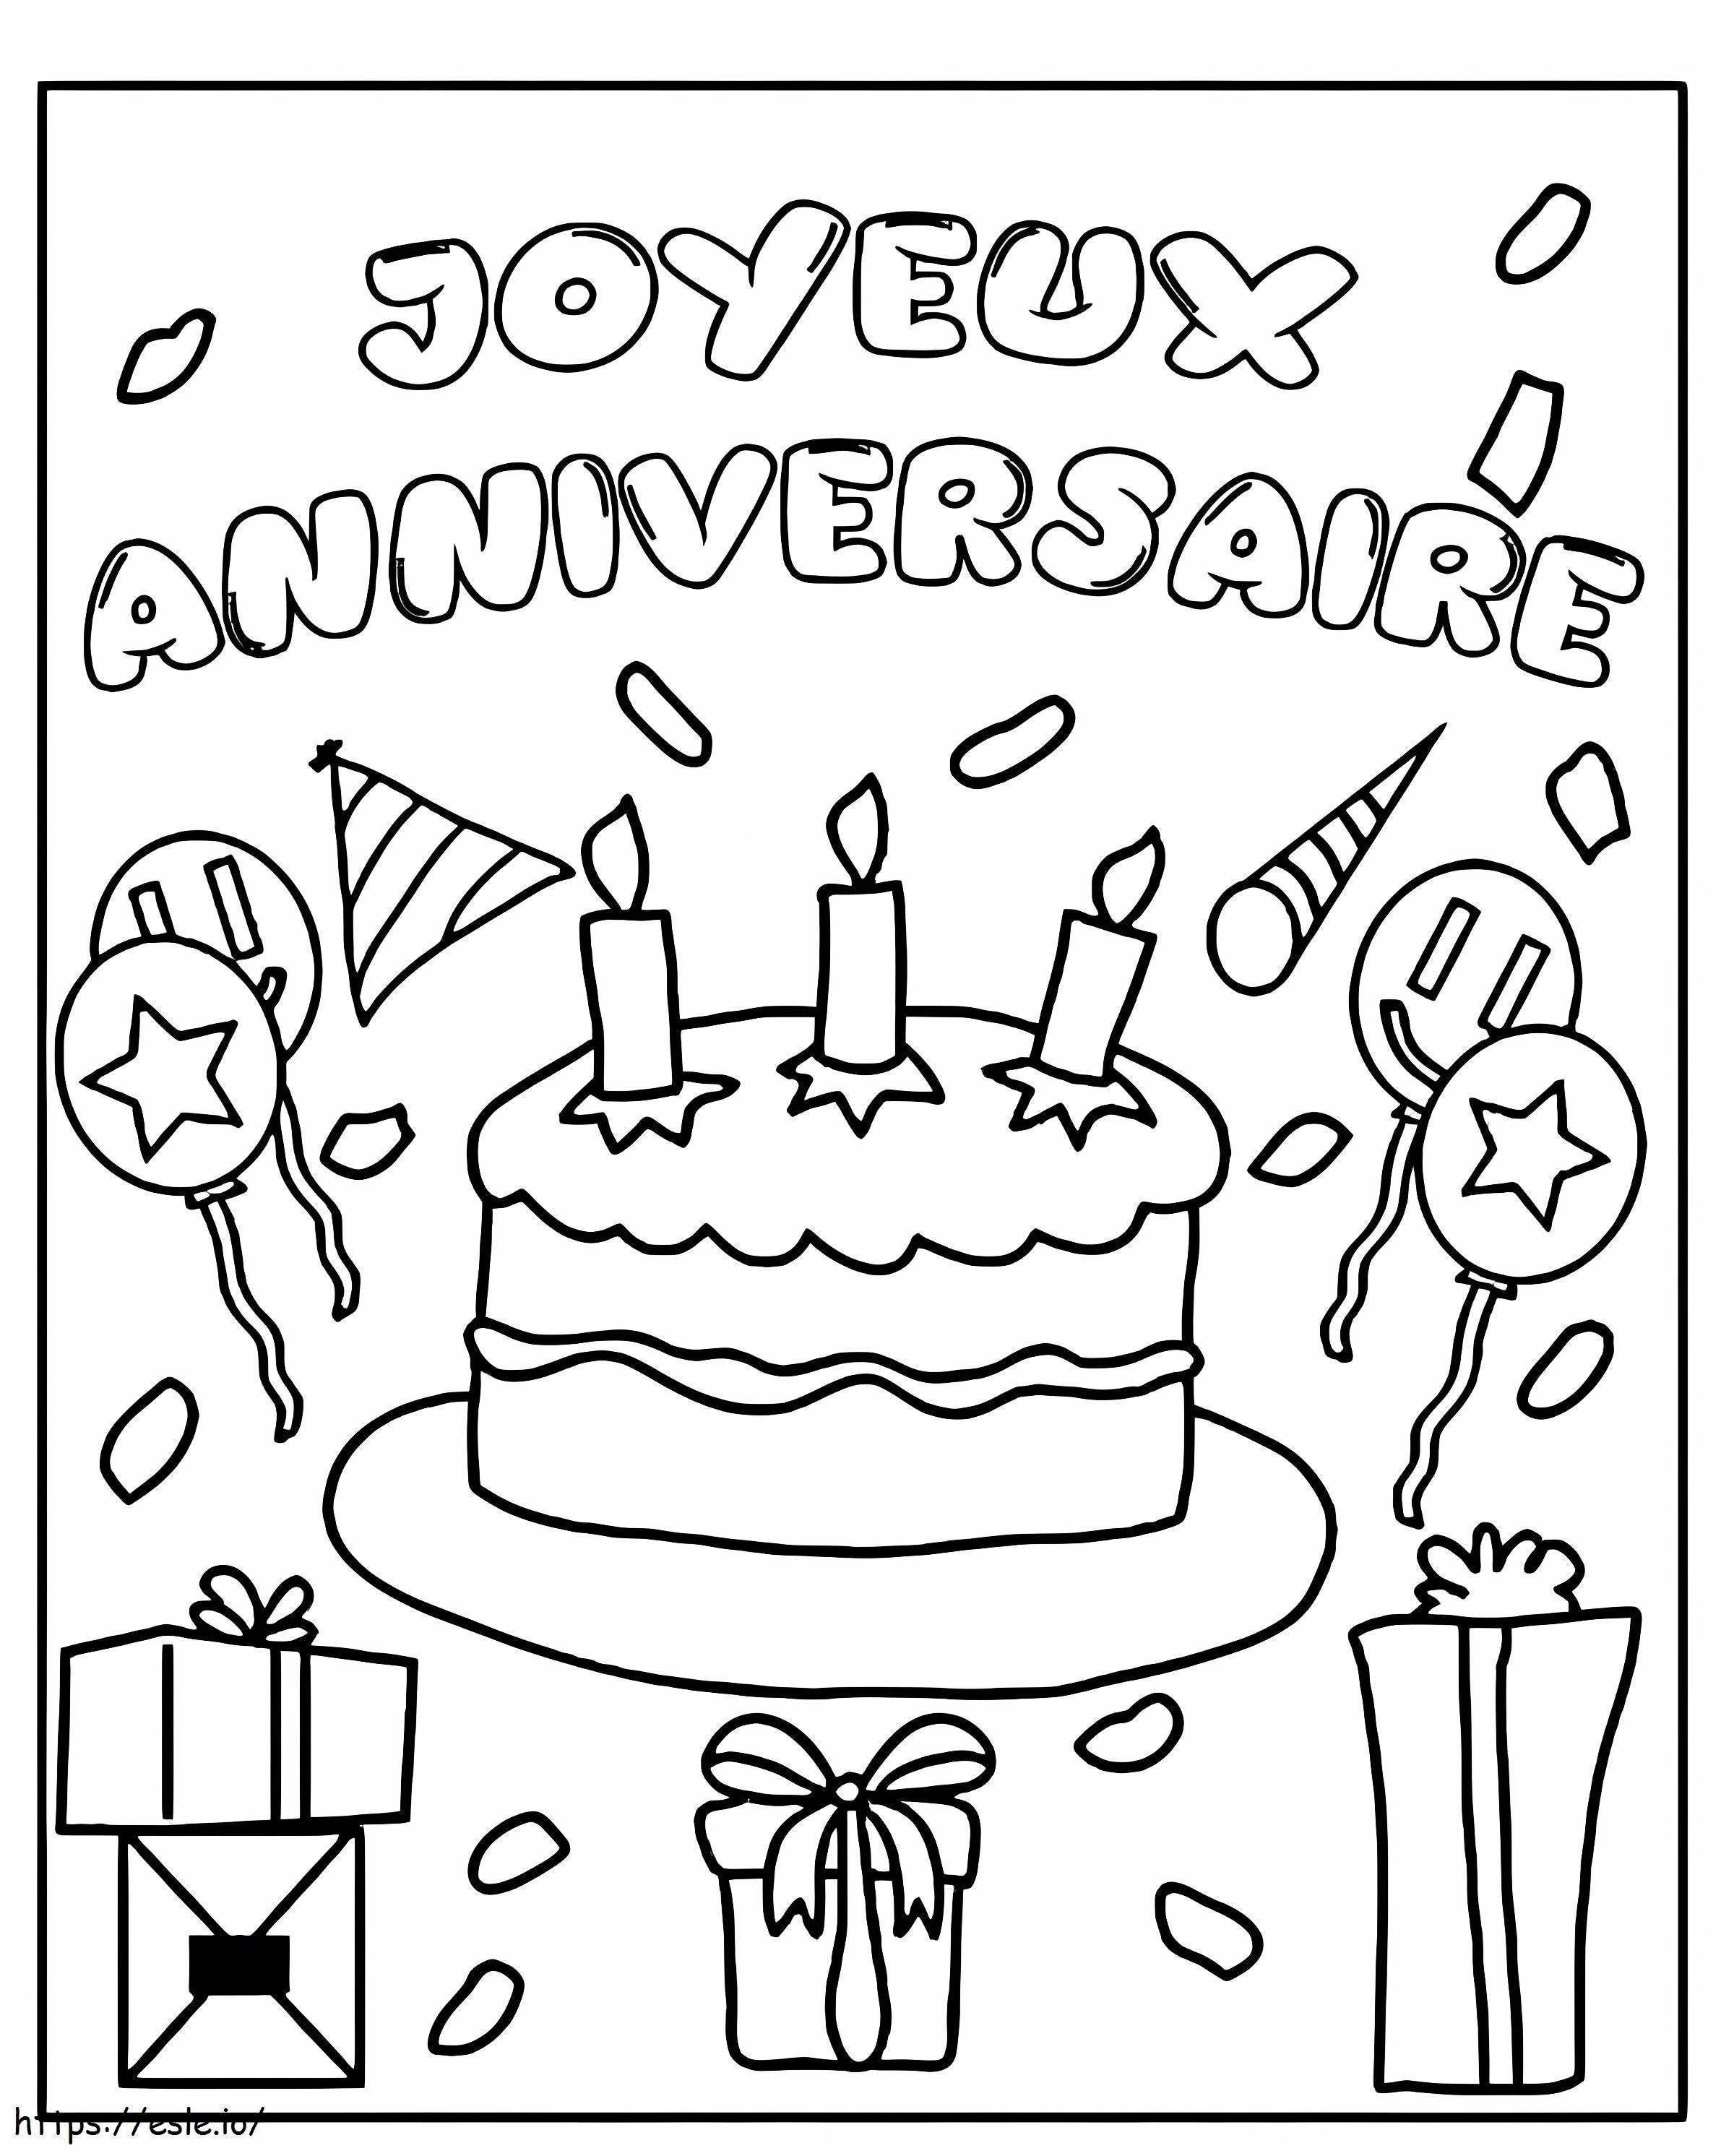 Happy Birthday With A Delicious Cake coloring page